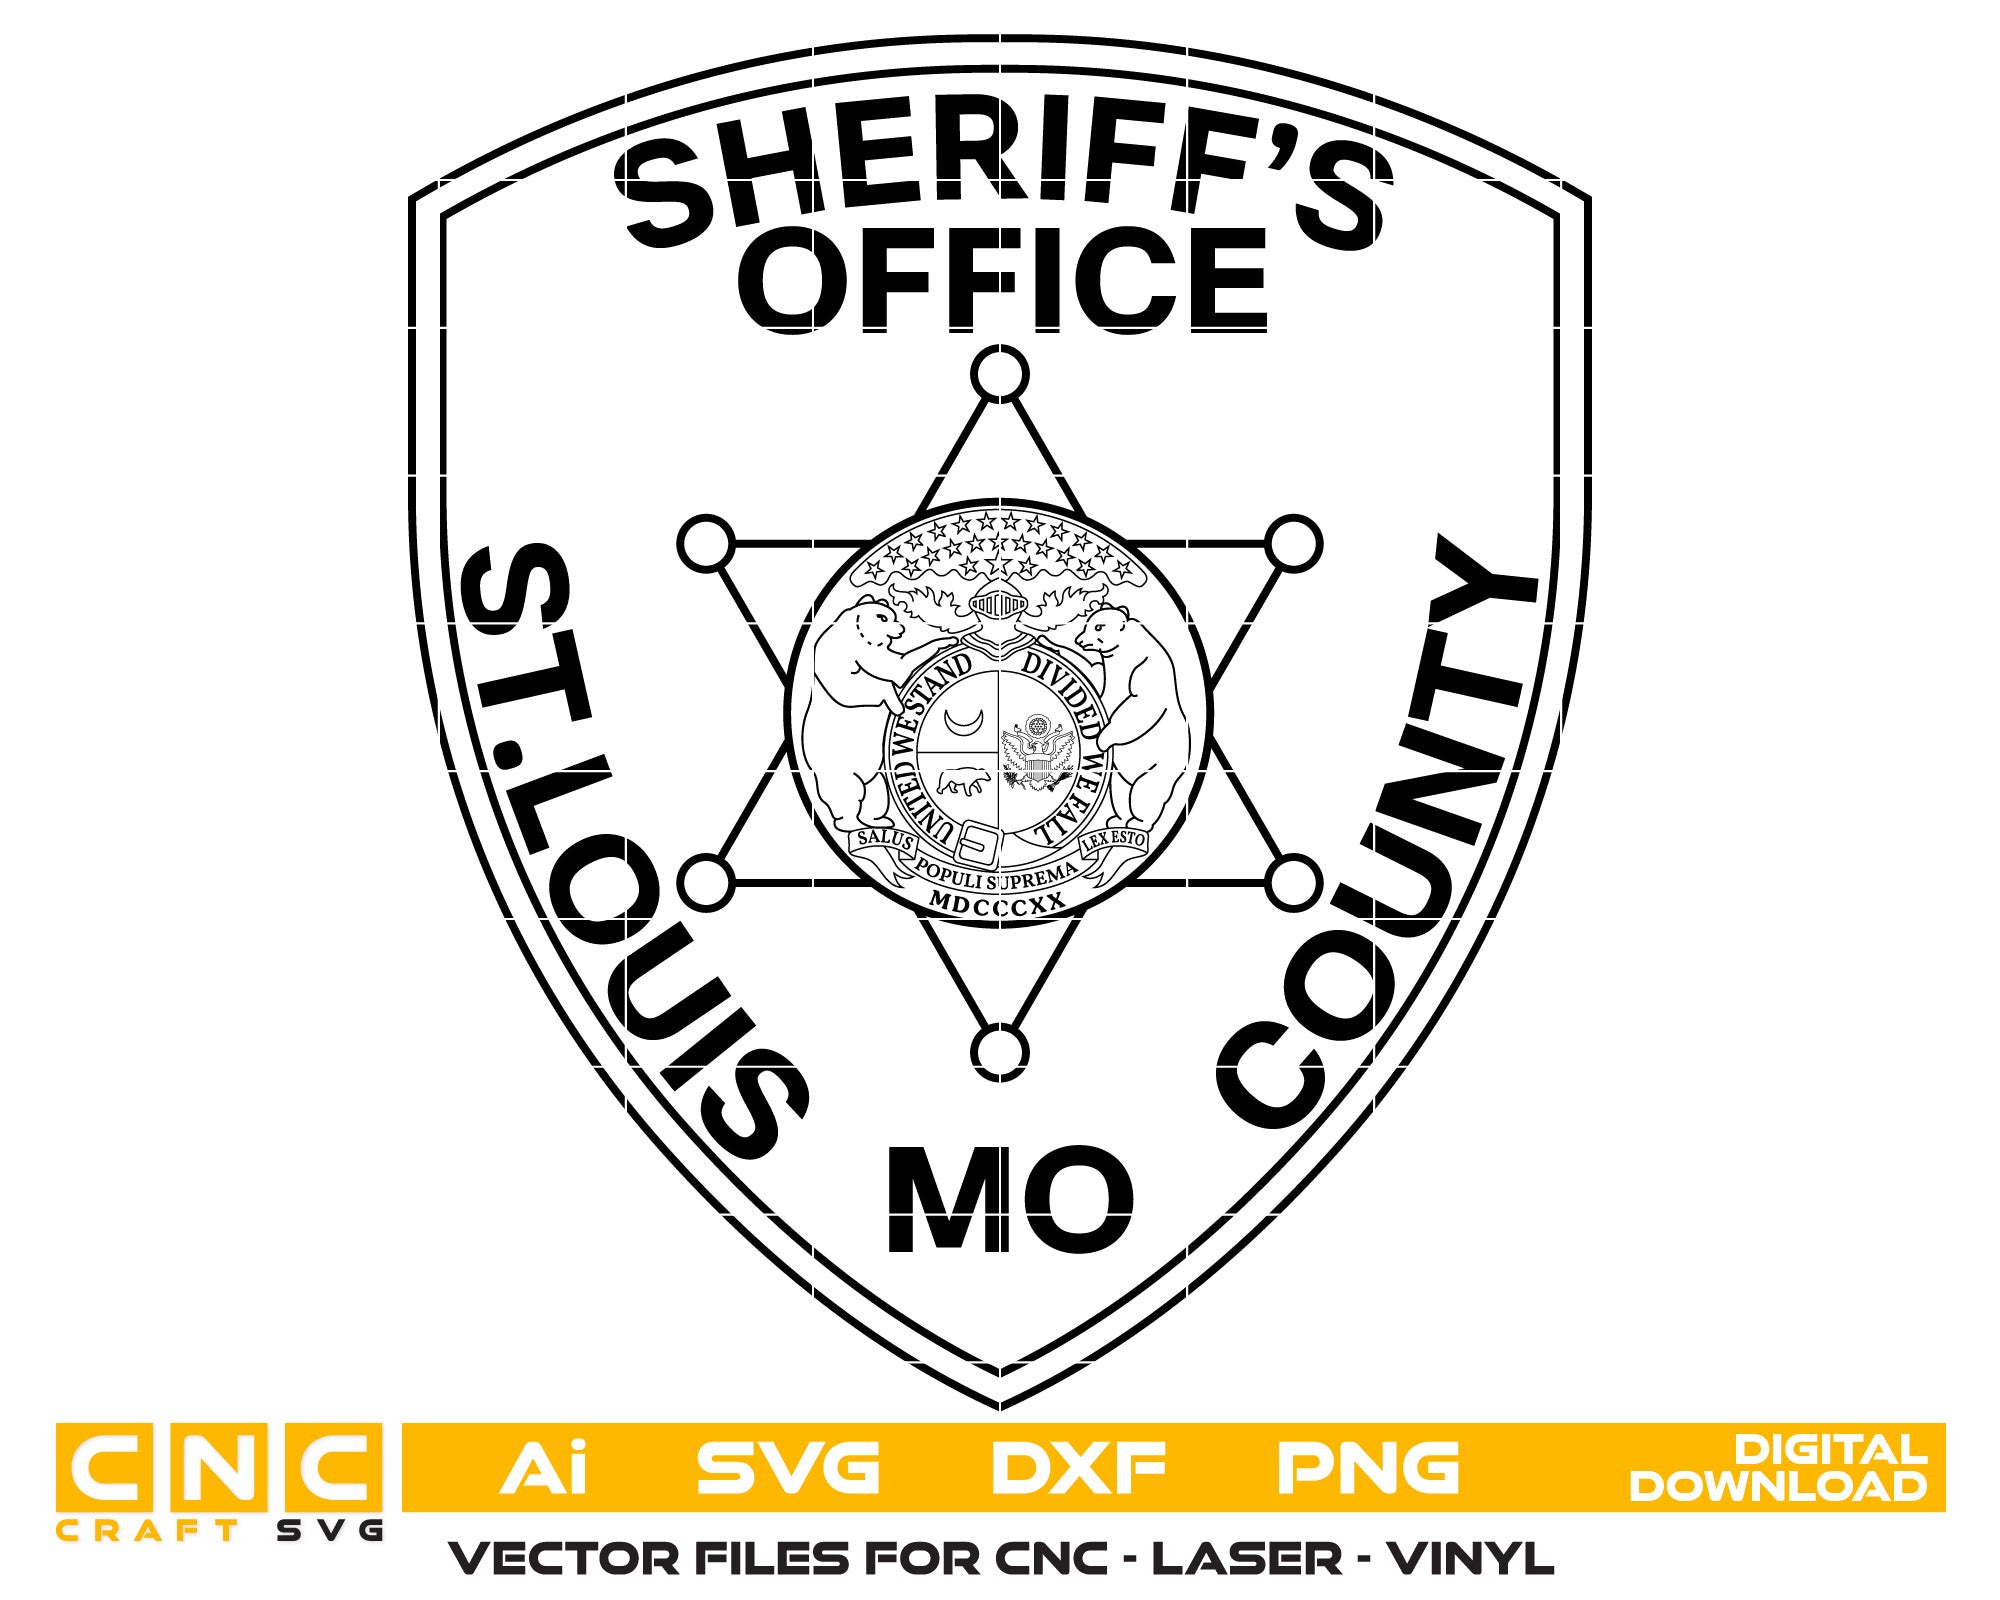 St. Louis County Sheriff Office Badge vector art